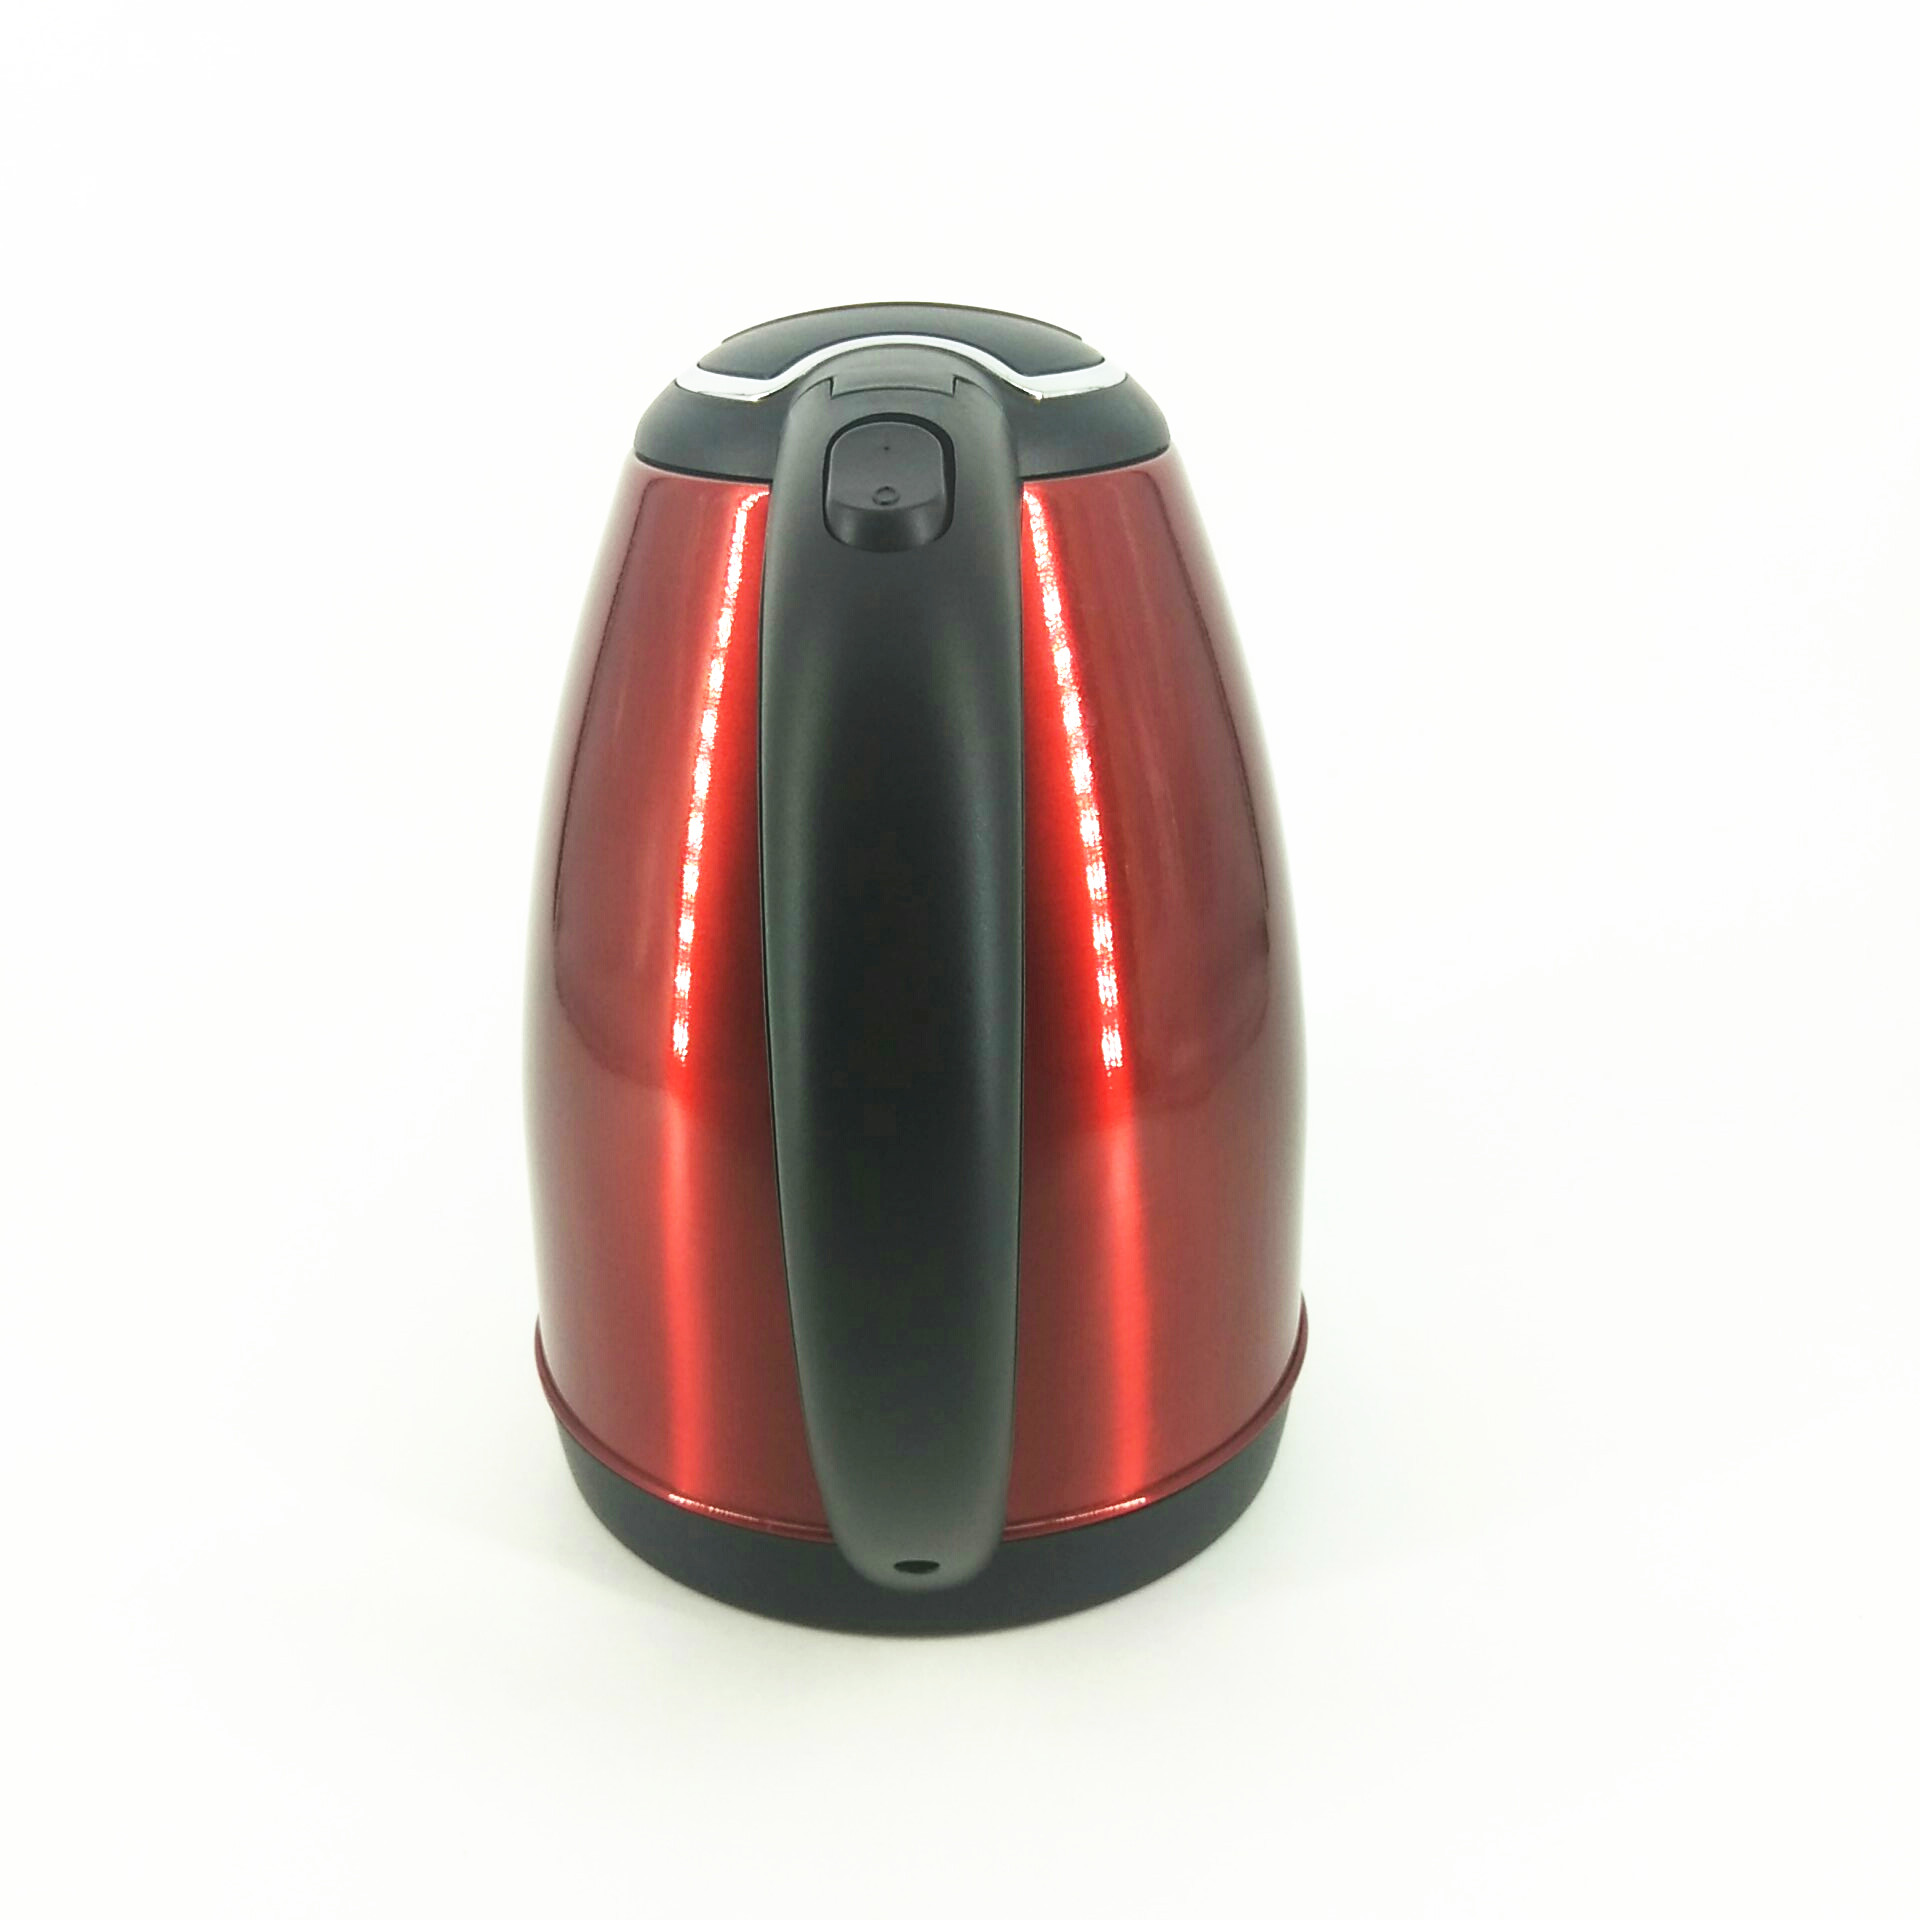 1.8L red housing electric water kettle